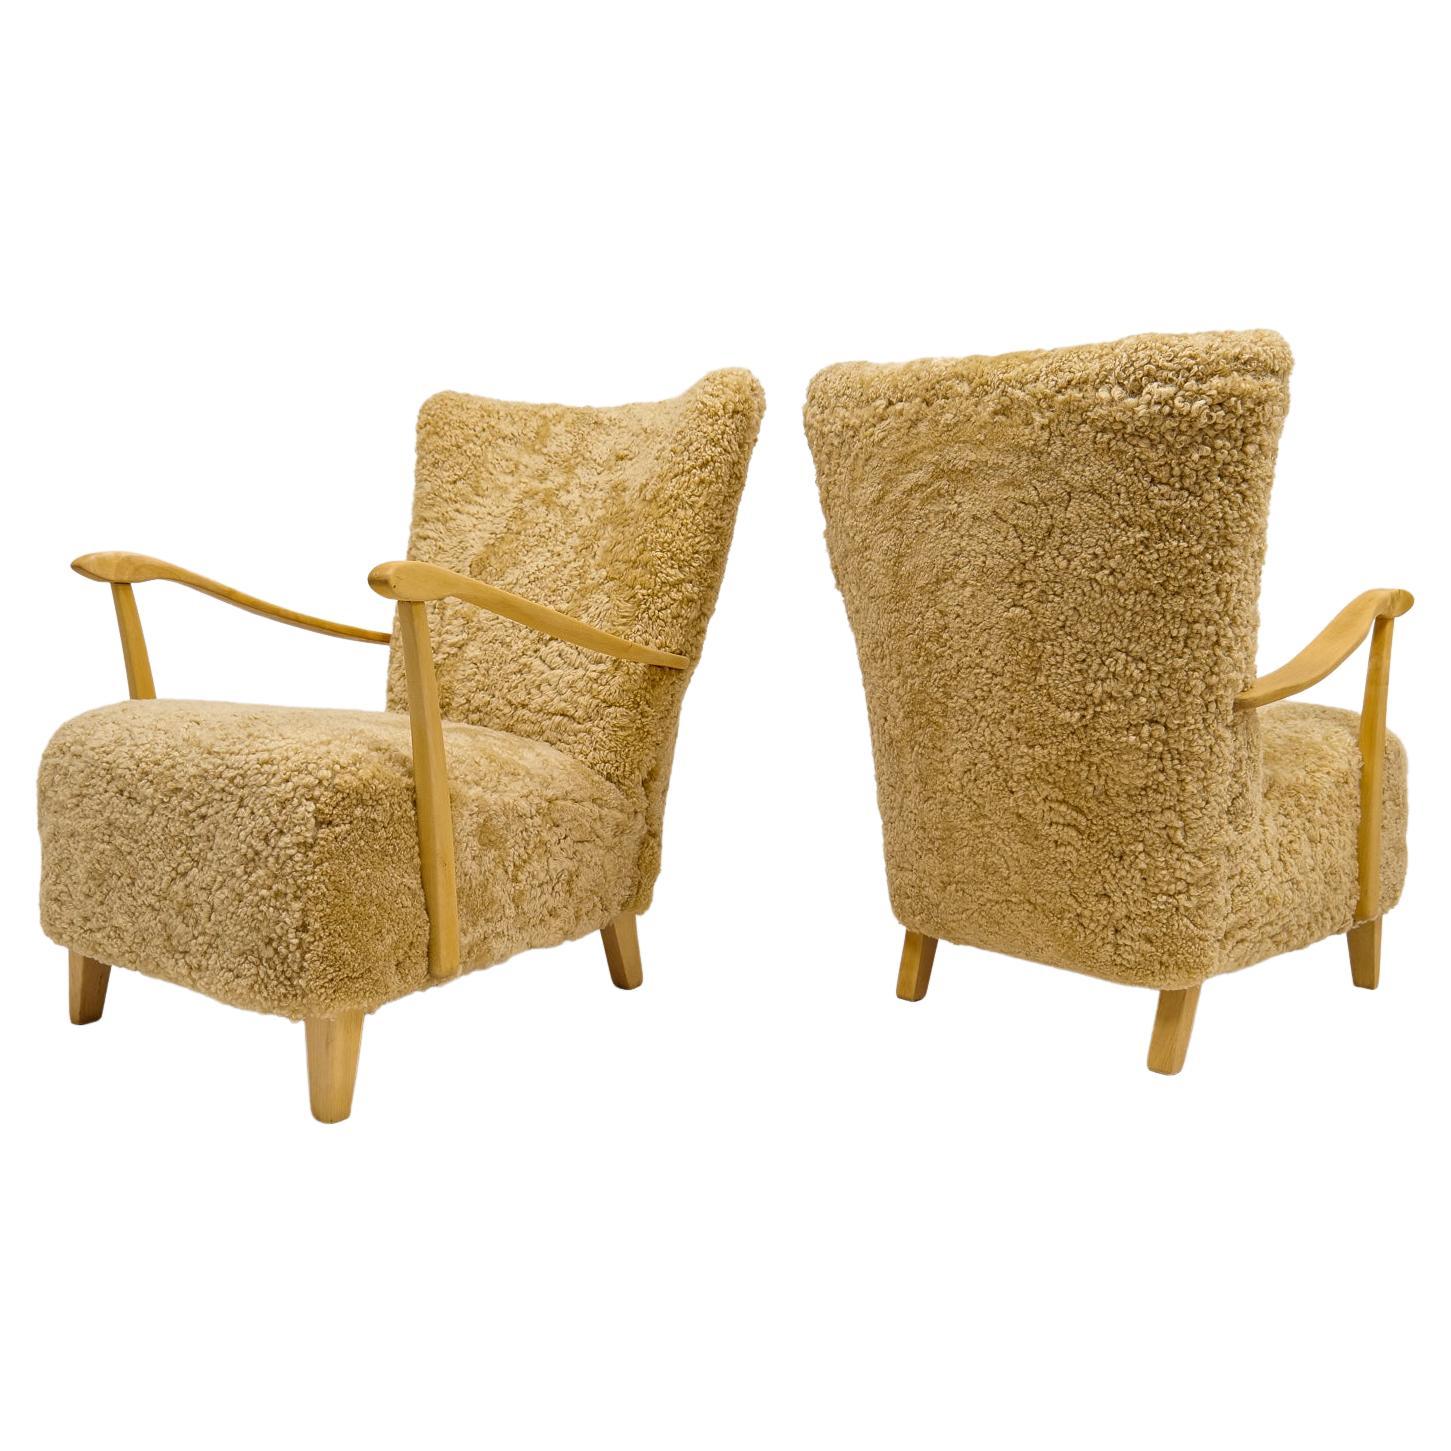 Midcentury Pair of Easy Chairs DUX in Sheepskin shearling, Sweden, 1950s